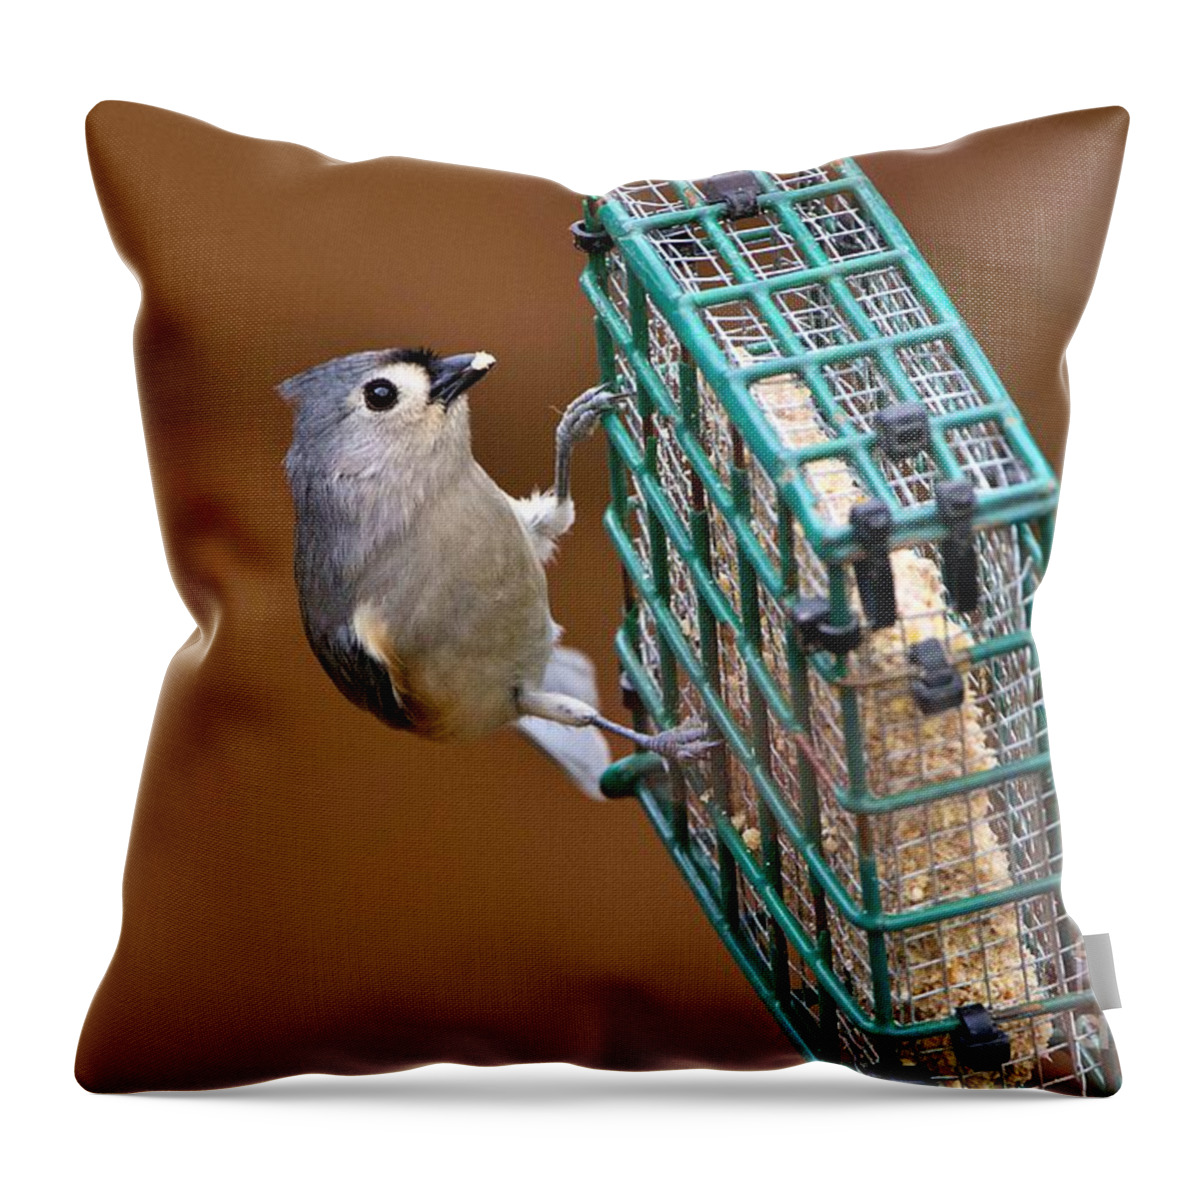 Tufted Throw Pillow featuring the photograph Tufted titmouse feeding by Yvonne M Smith